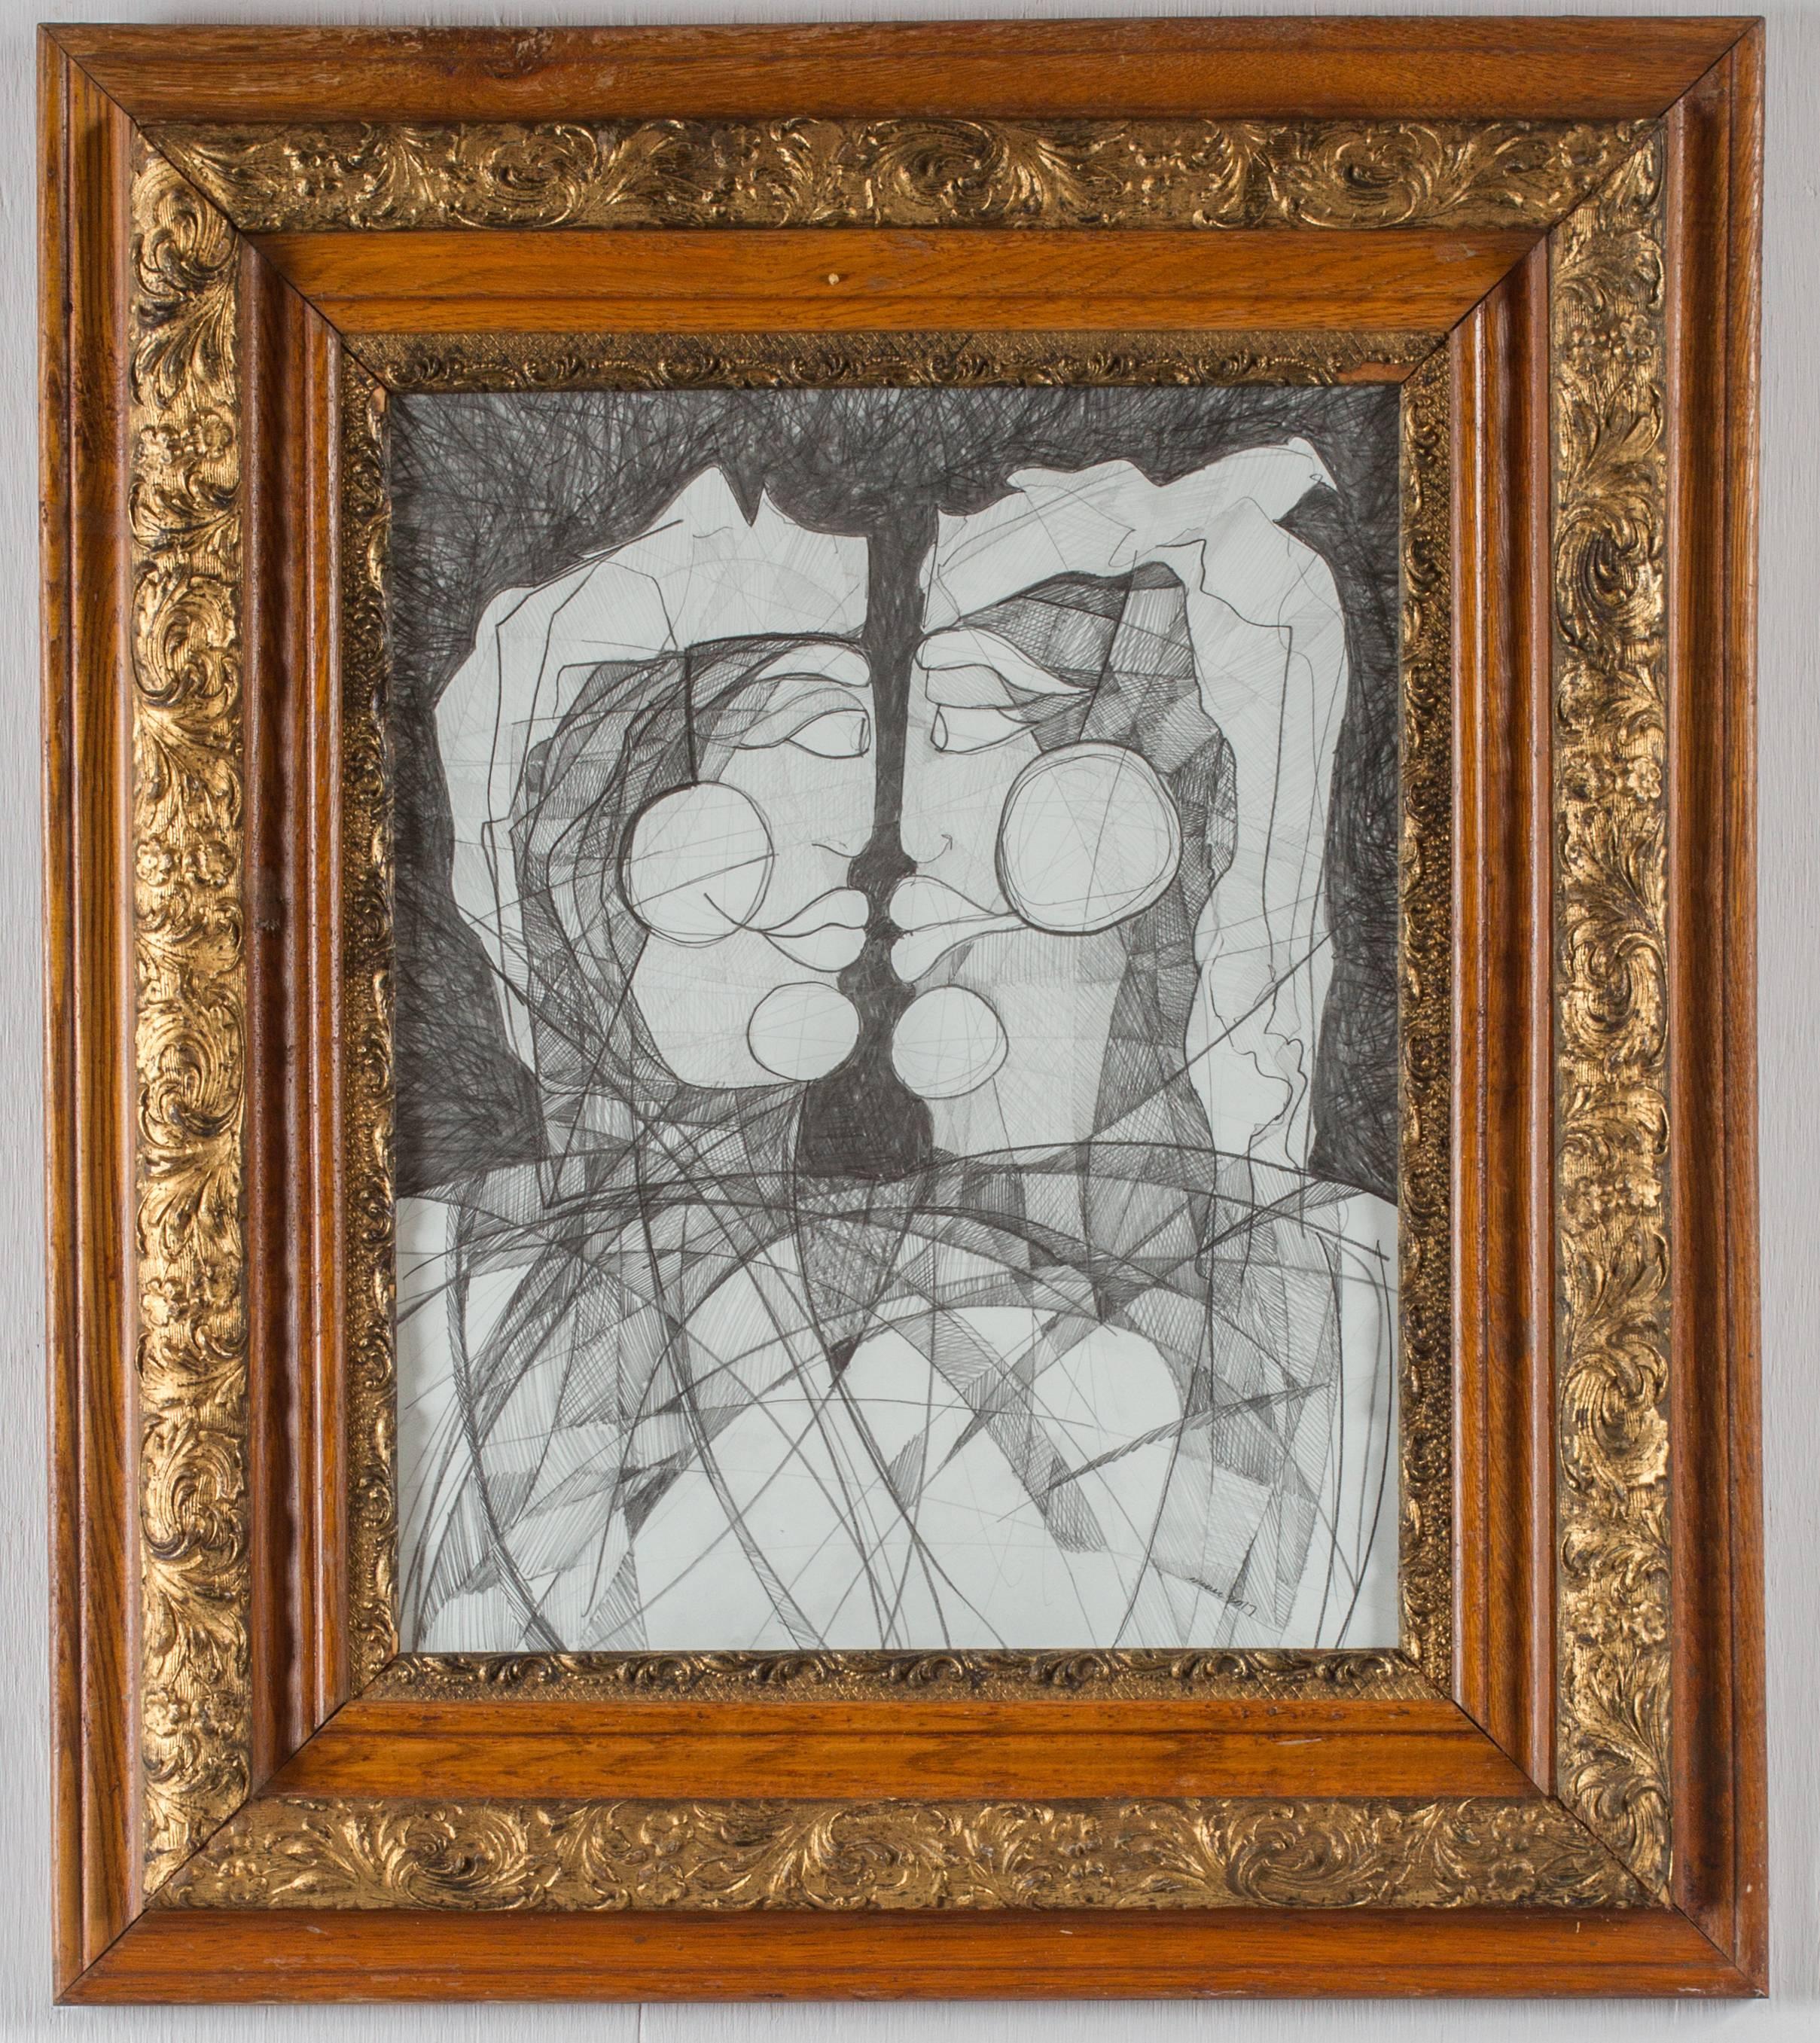 Janus Woman #2 (Abstract Figurative Portrait Drawing on Paper in Antique Frame)